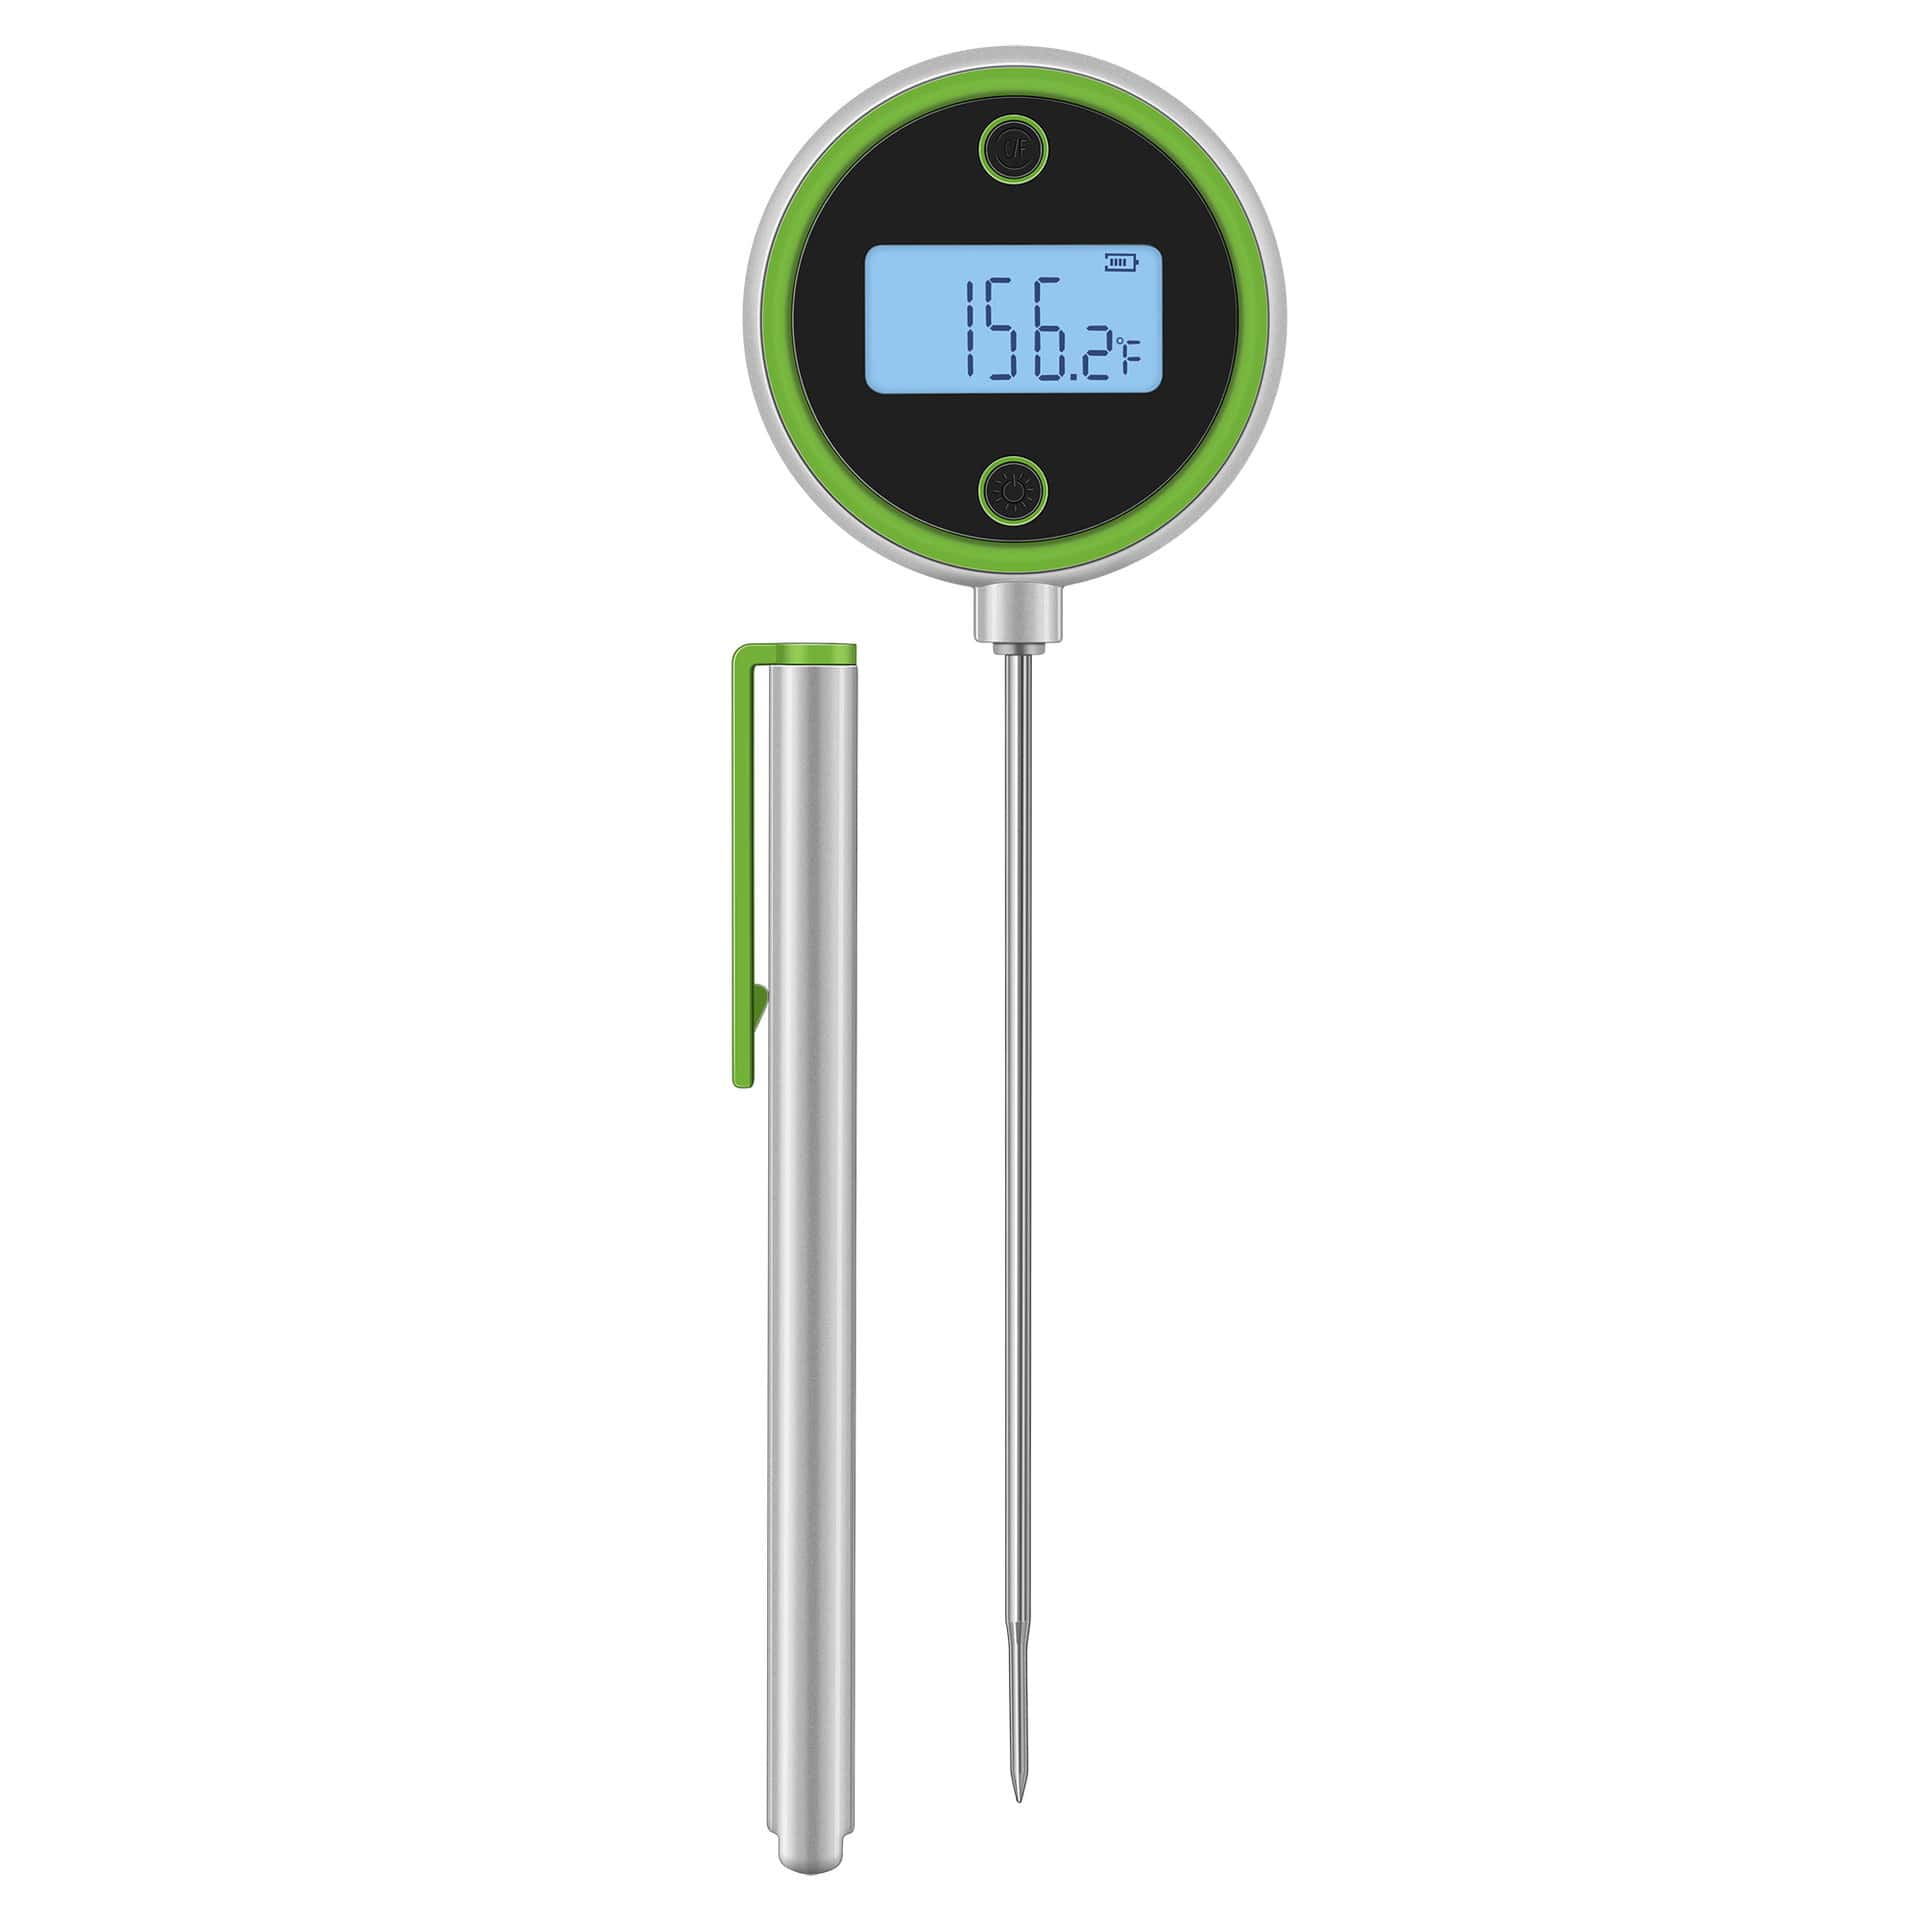 ThermoPop 2 Thermometer  Thermometer, Cooking tools, Kitchen gadgets